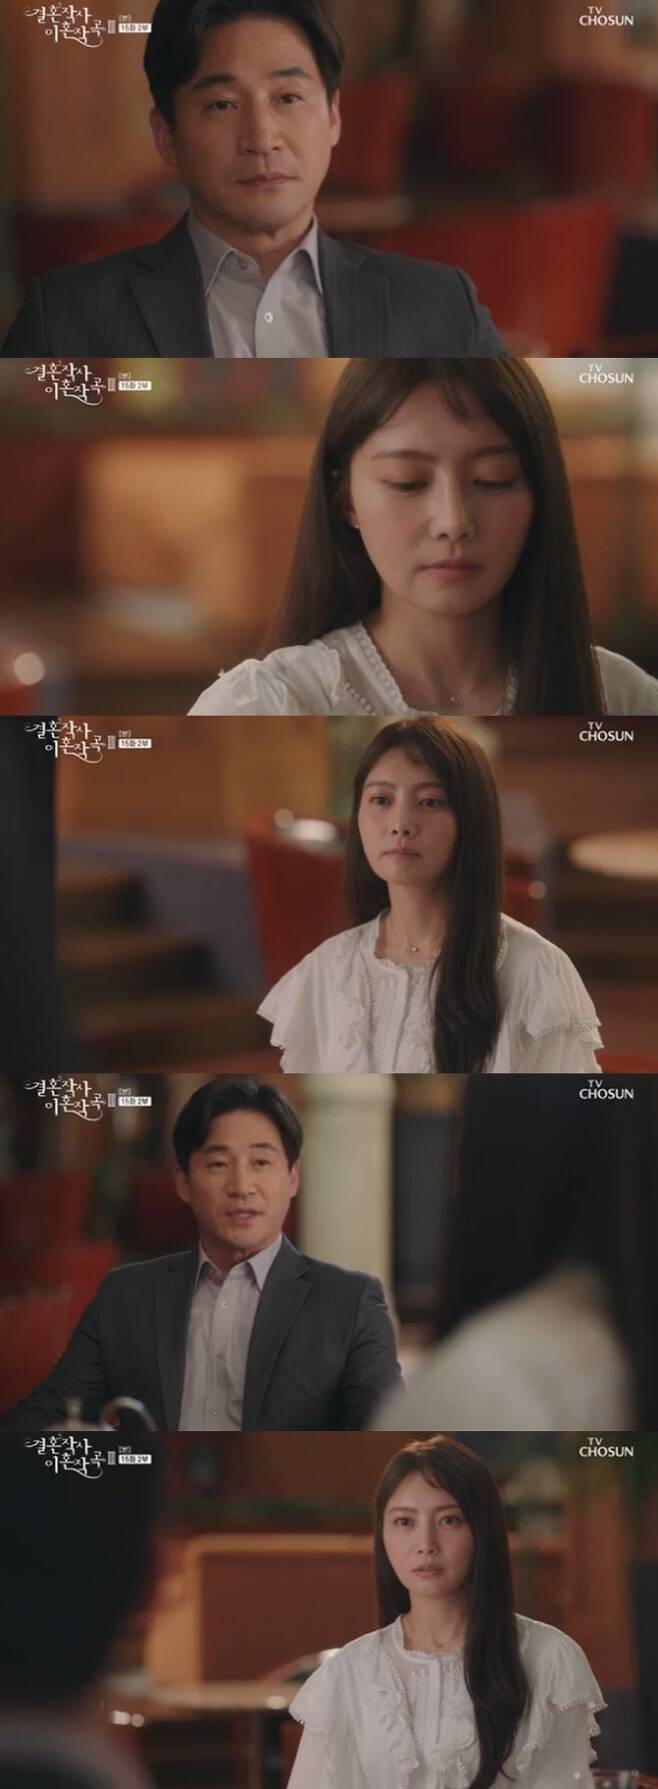 Seoul = = Marriage Writer Divorce Composition 3 Jeon No-Min and Lim Hye-young met again.In TV Chosun (CHOSUN)s Divorce Composition 3 of Marriage Writers (playplayplayed by Im Sung-han, directed by Park Chae-won and Baek Ji-su), which was broadcast on the afternoon of the 30th, Park Hae-ryun (Jeon No-Min), who had an affair in the past, and Nam Hye-young (played by Lee Hye-sook), met again as the mainline of Kim Dong-mi (played by Lee Hye-sook).On this day, Park found Nam Gabin sitting at the hotel and spoke first. He said, Its been a long time.I searched once, I had good news. Nam said, Is your health okay or not a marriage relationship.They decided to see Kim Dong-mi at the same time, and the man Kim Dong-mi wanted to introduce to Nam Ga-bin was Park Hae-ryun, but the two of them had already been in an affair.Nam Gabin said, You remarried your wife, I heard you across.Marriage writer divorce composition 3 leaves the final meeting on May 1.